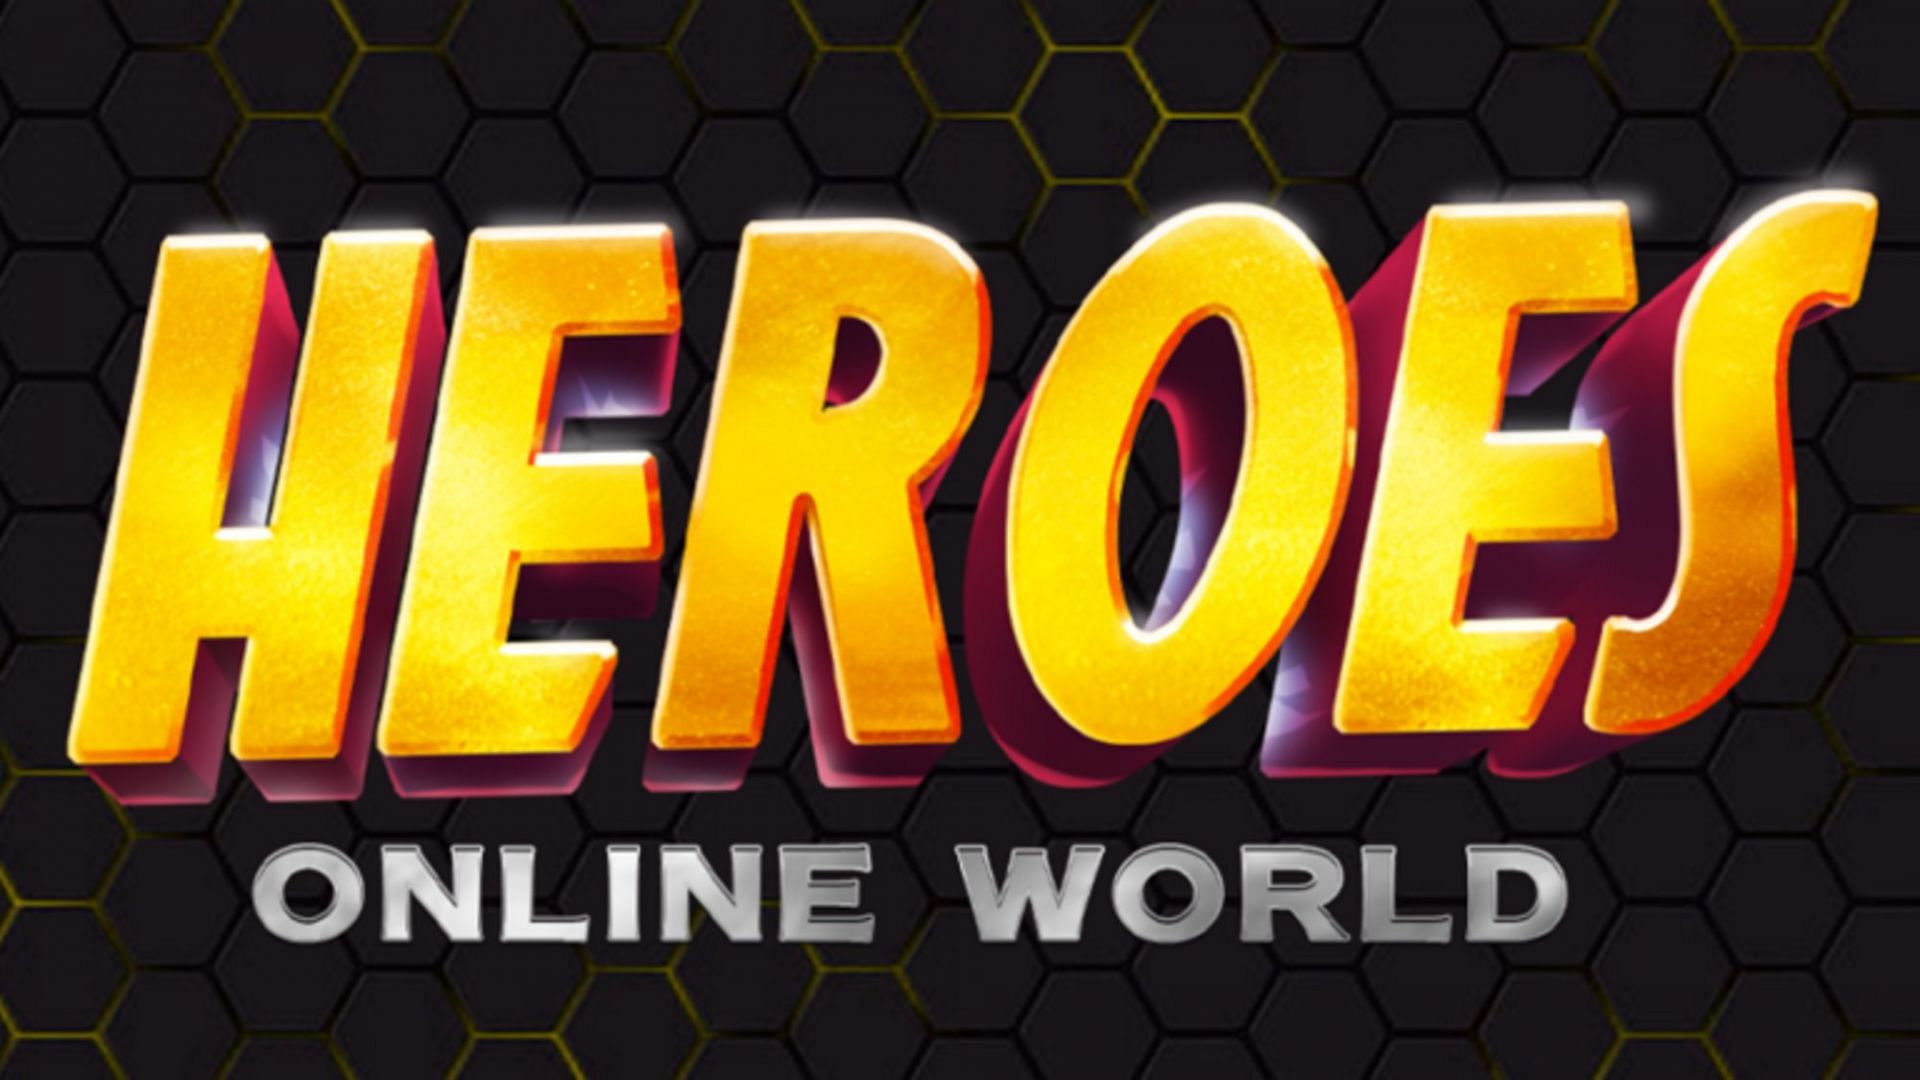 The Multiverse of heroes (Image via Roblox)